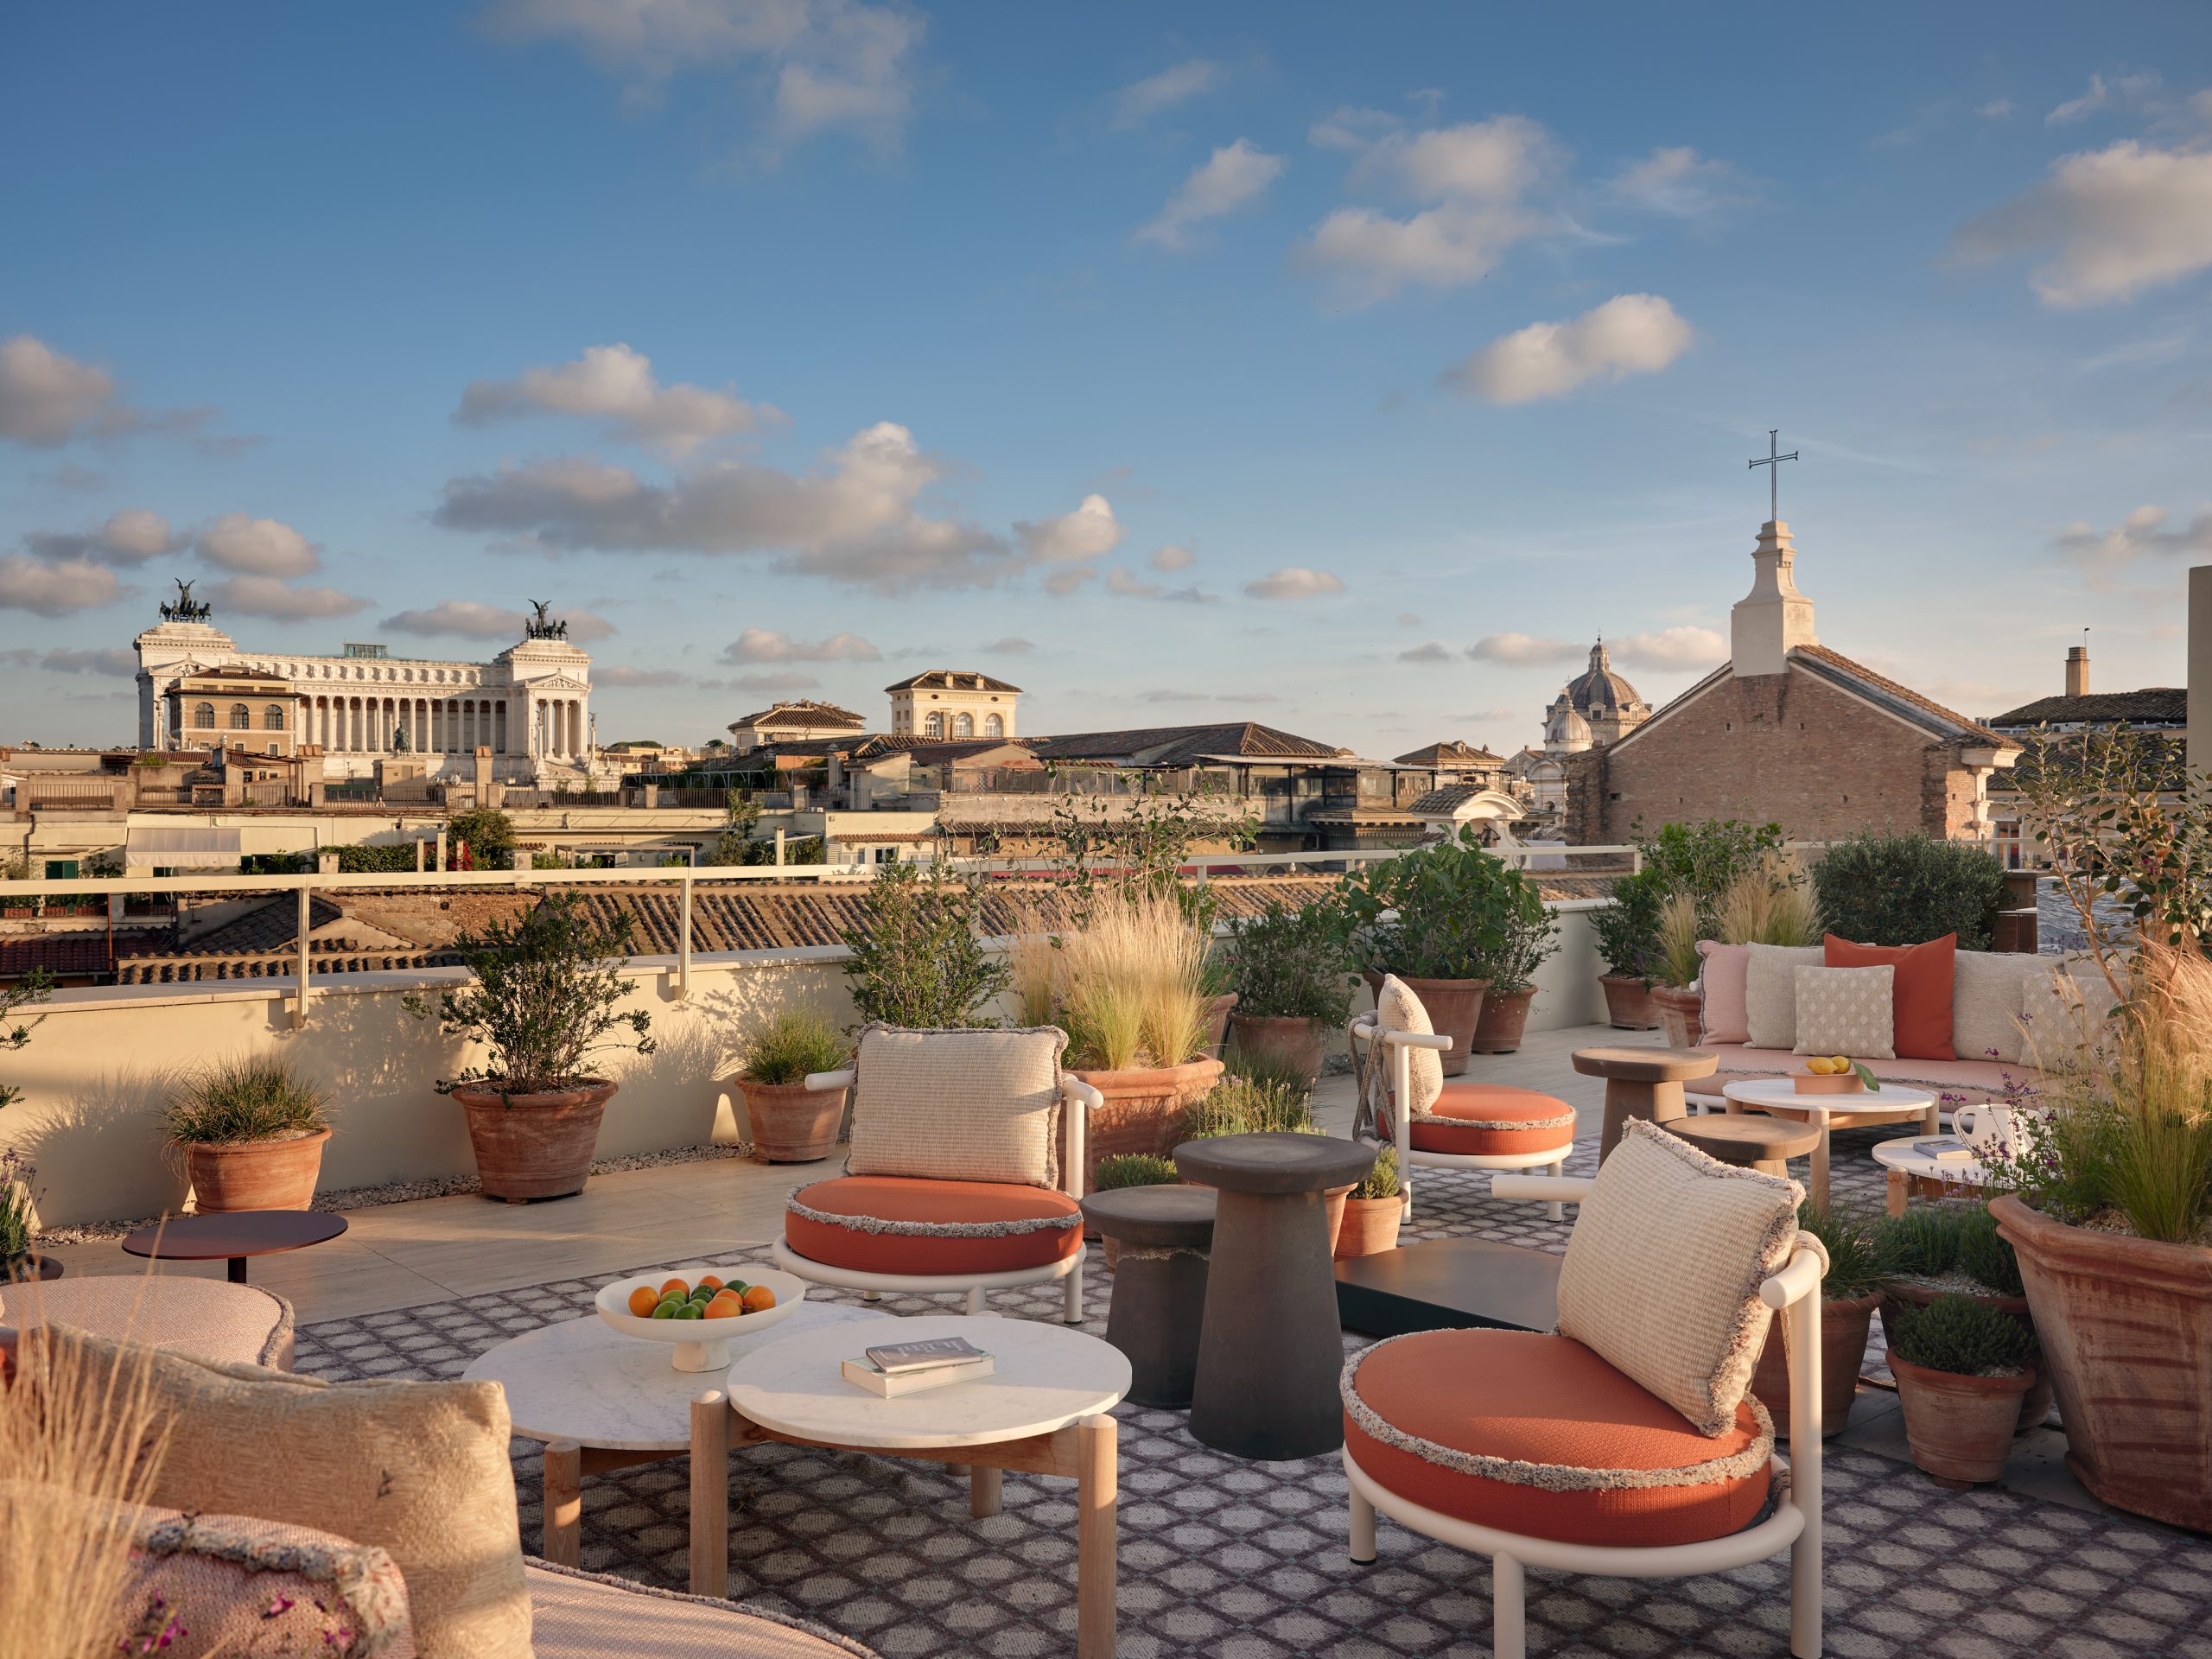 Discovering the Six Senses Rome with Patricia Urquiola